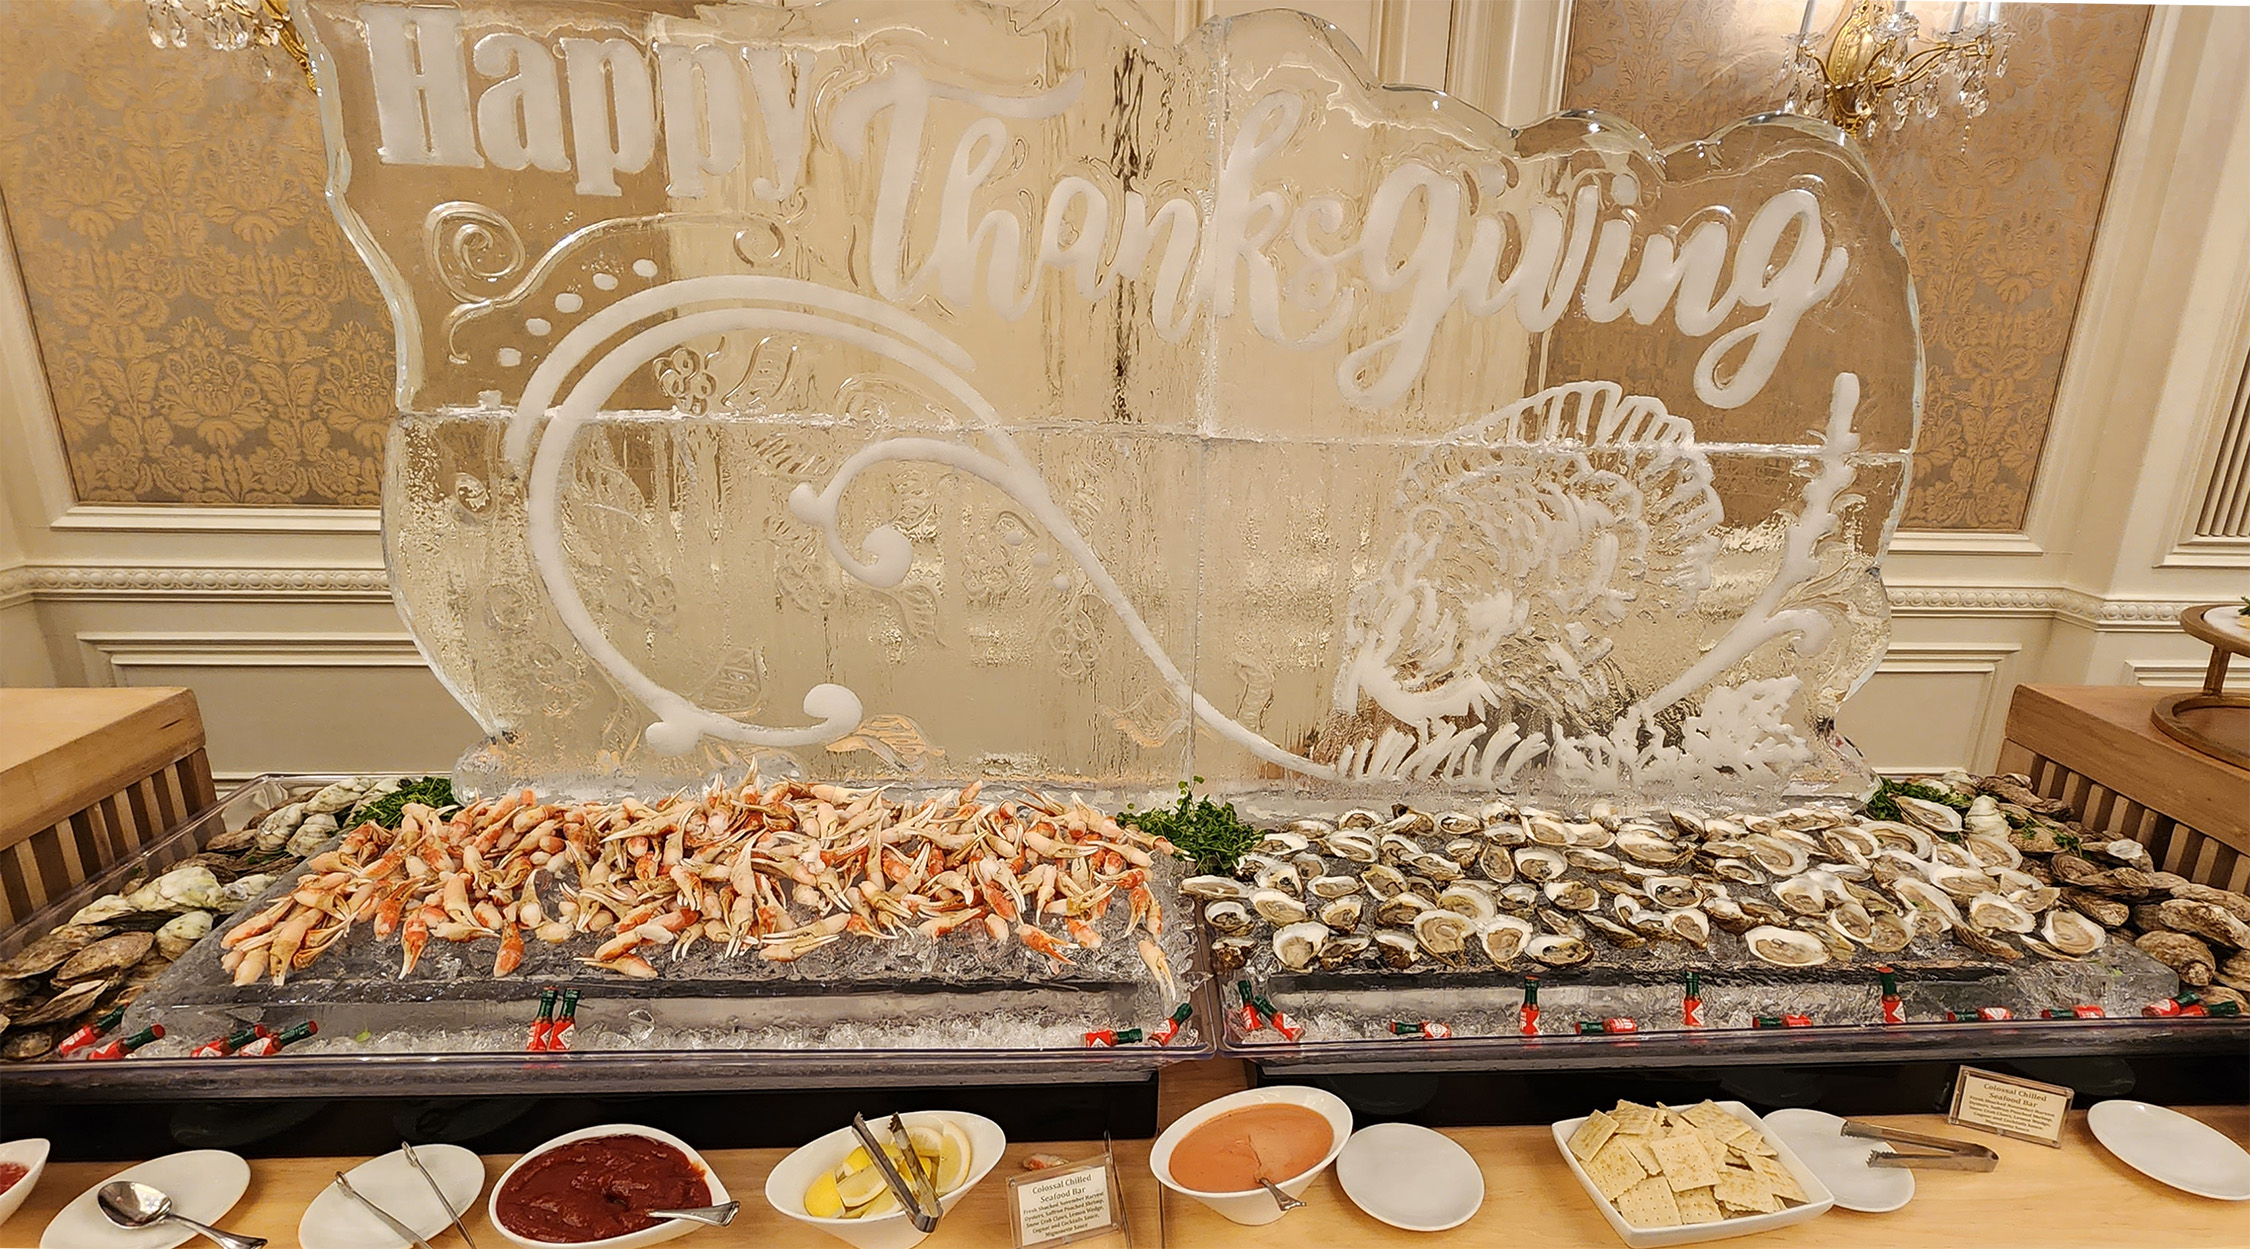 Thanksgiving Feast at Nemacolin